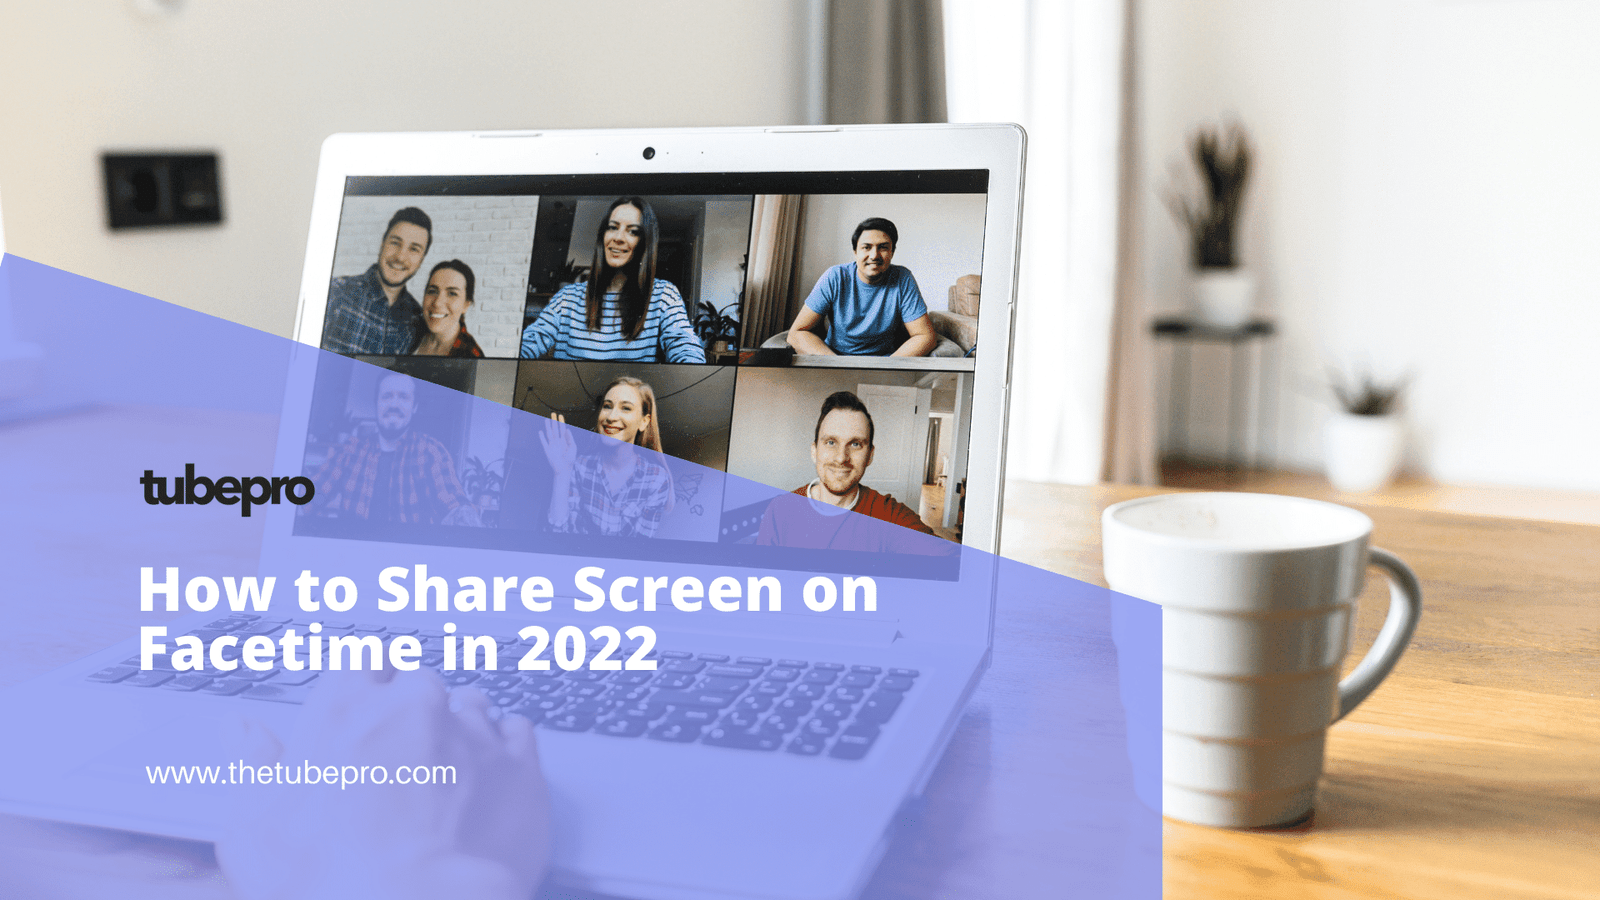 How to Share Screen on Facetime in 2022